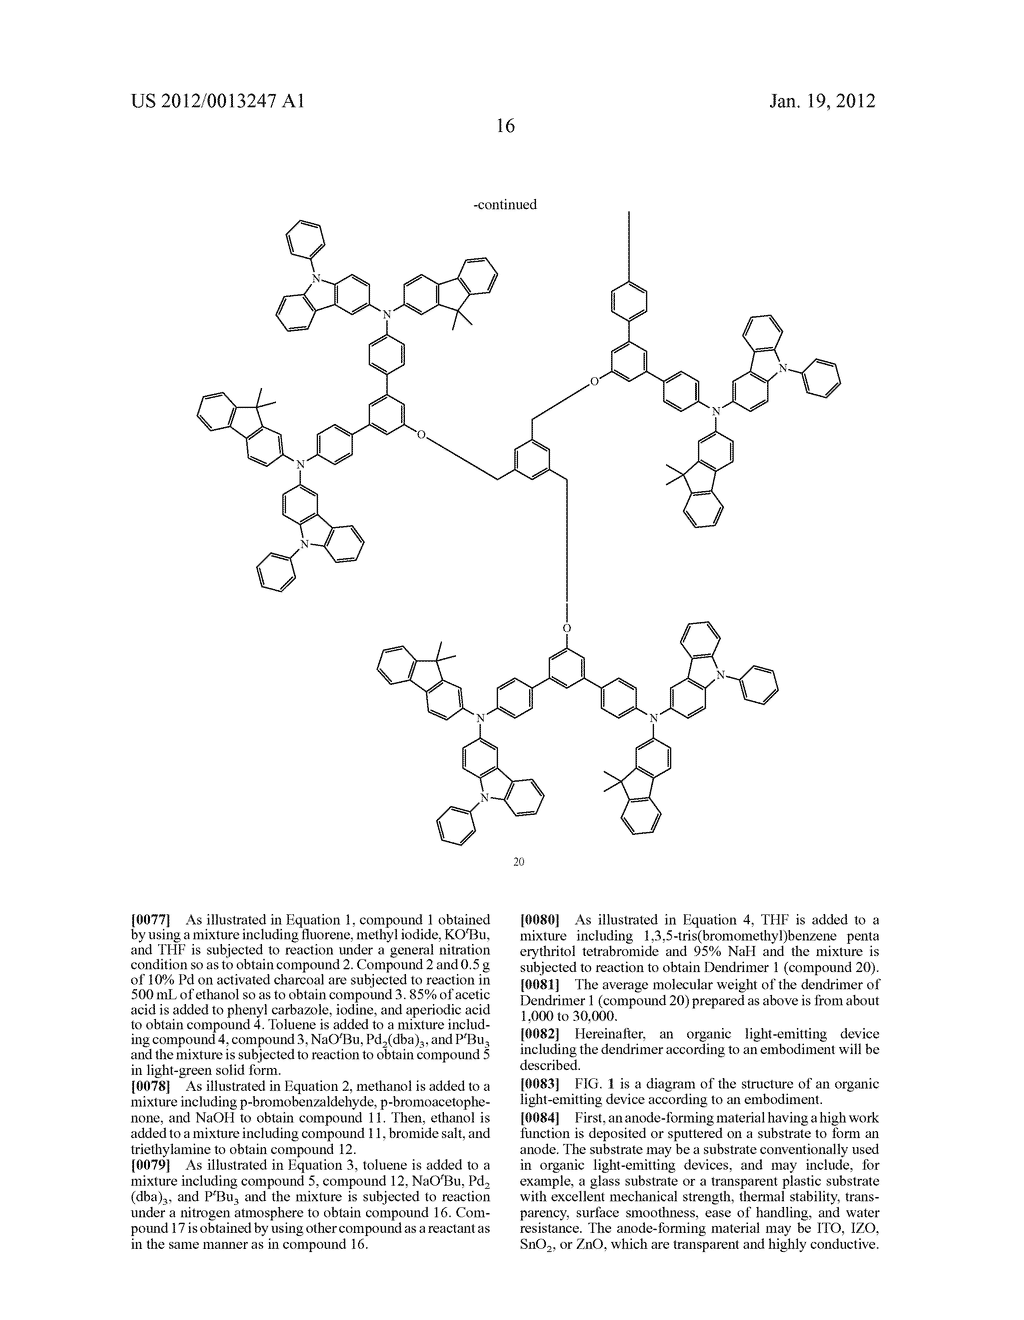 DENDRIMER AND ORGANIC LIGHT-EMITTING DEVICE USING THE SAME - diagram, schematic, and image 18